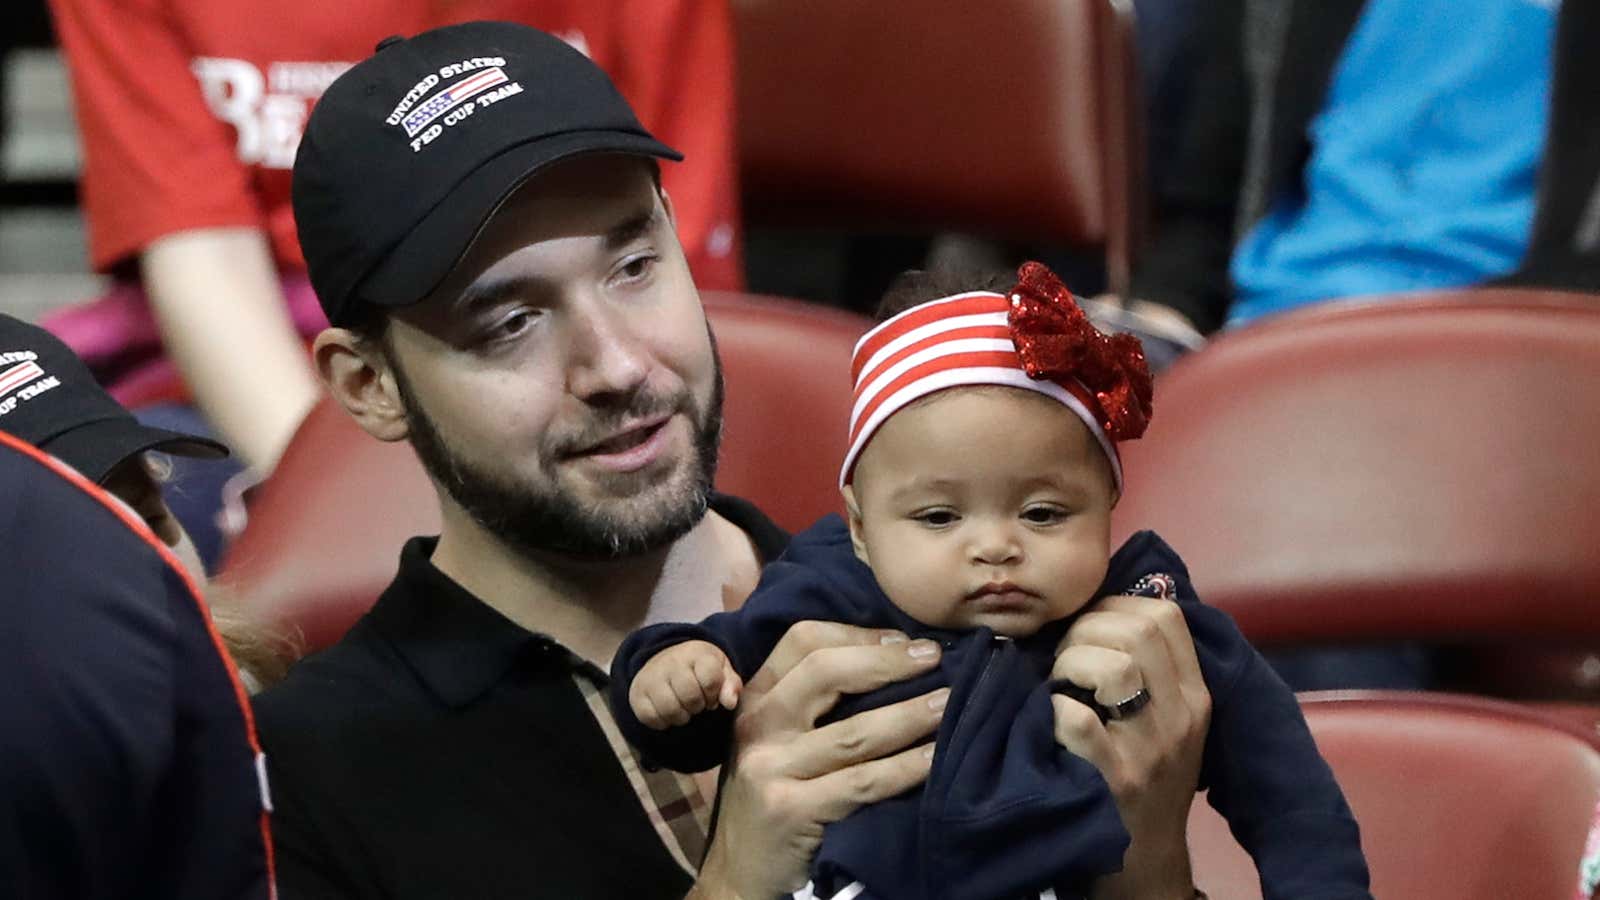 Ohanian wants to shift gender norms about caretaking.